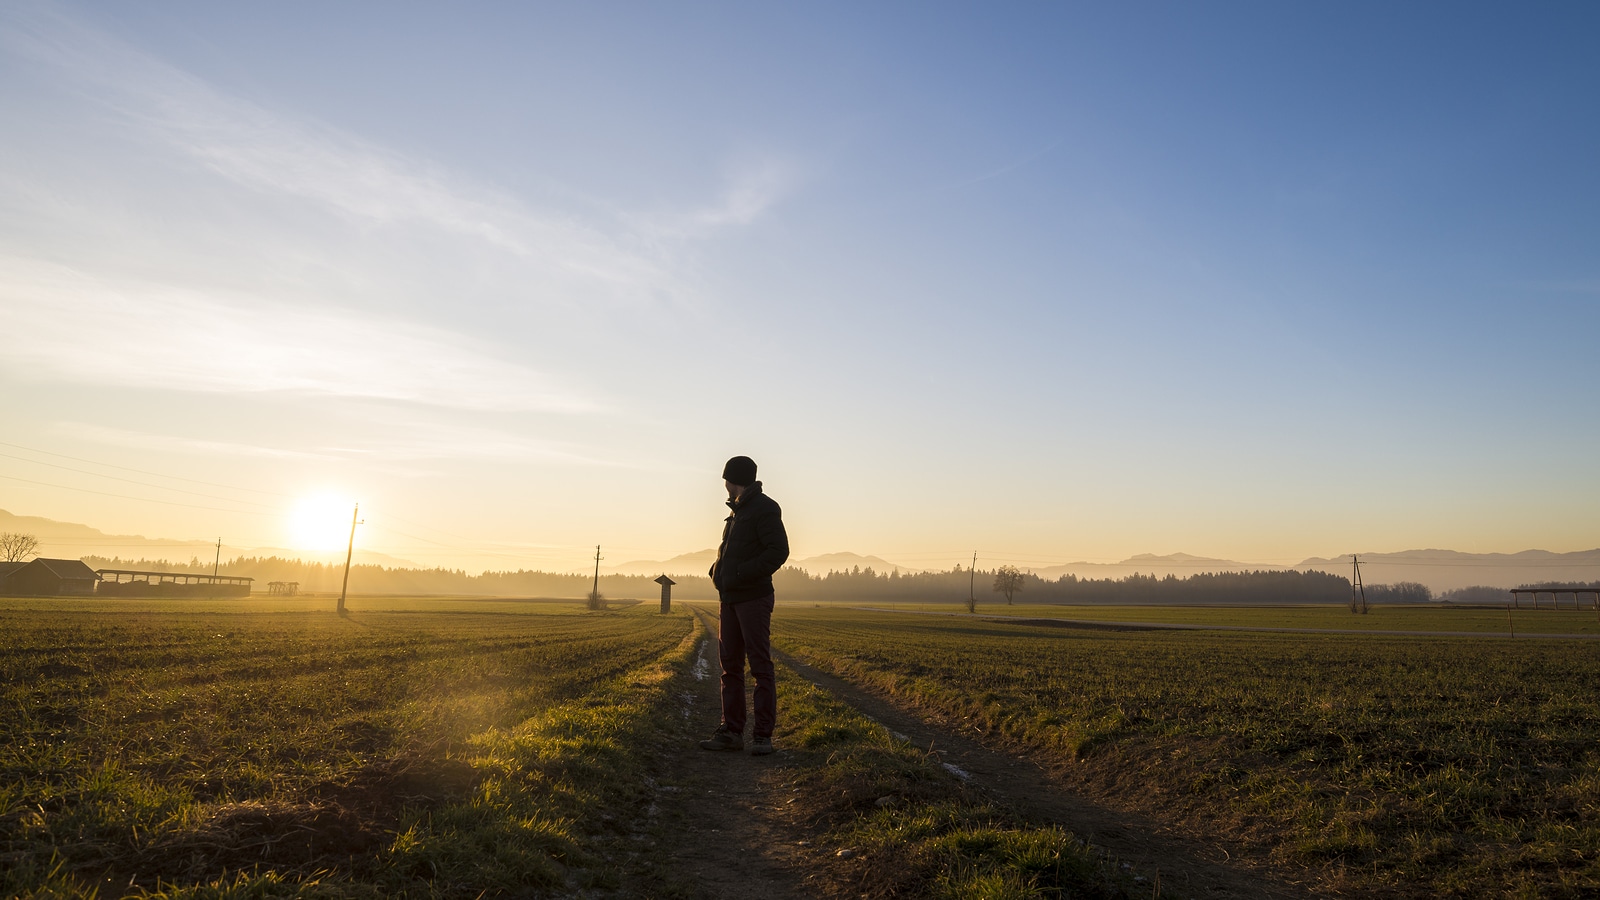 Young man standing on country road in a beautiful landscape looking back towards a setting evening sun.